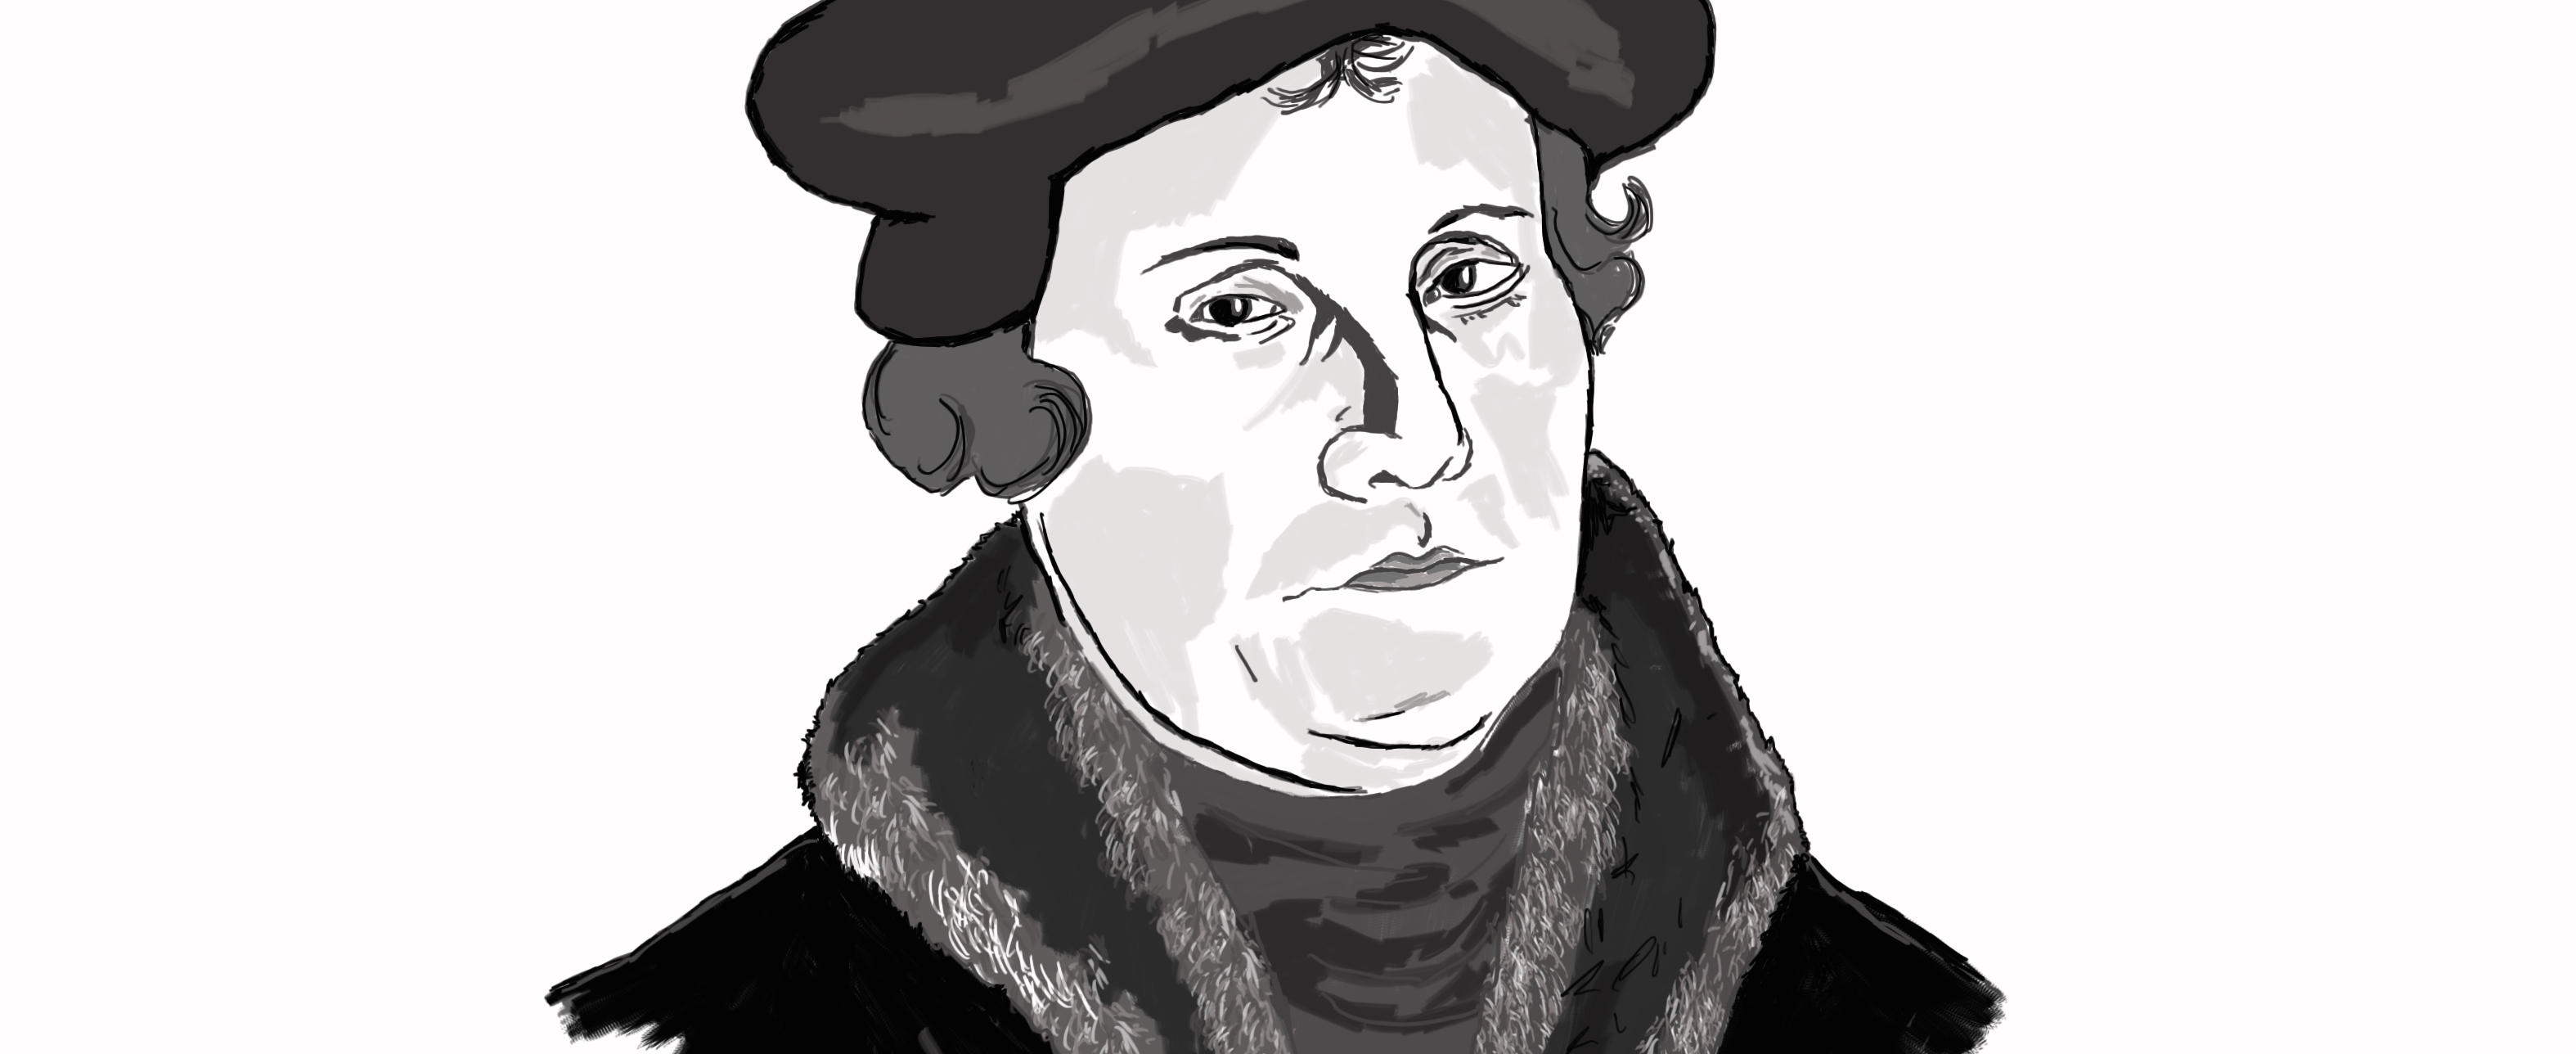 Martin Luther Sketch